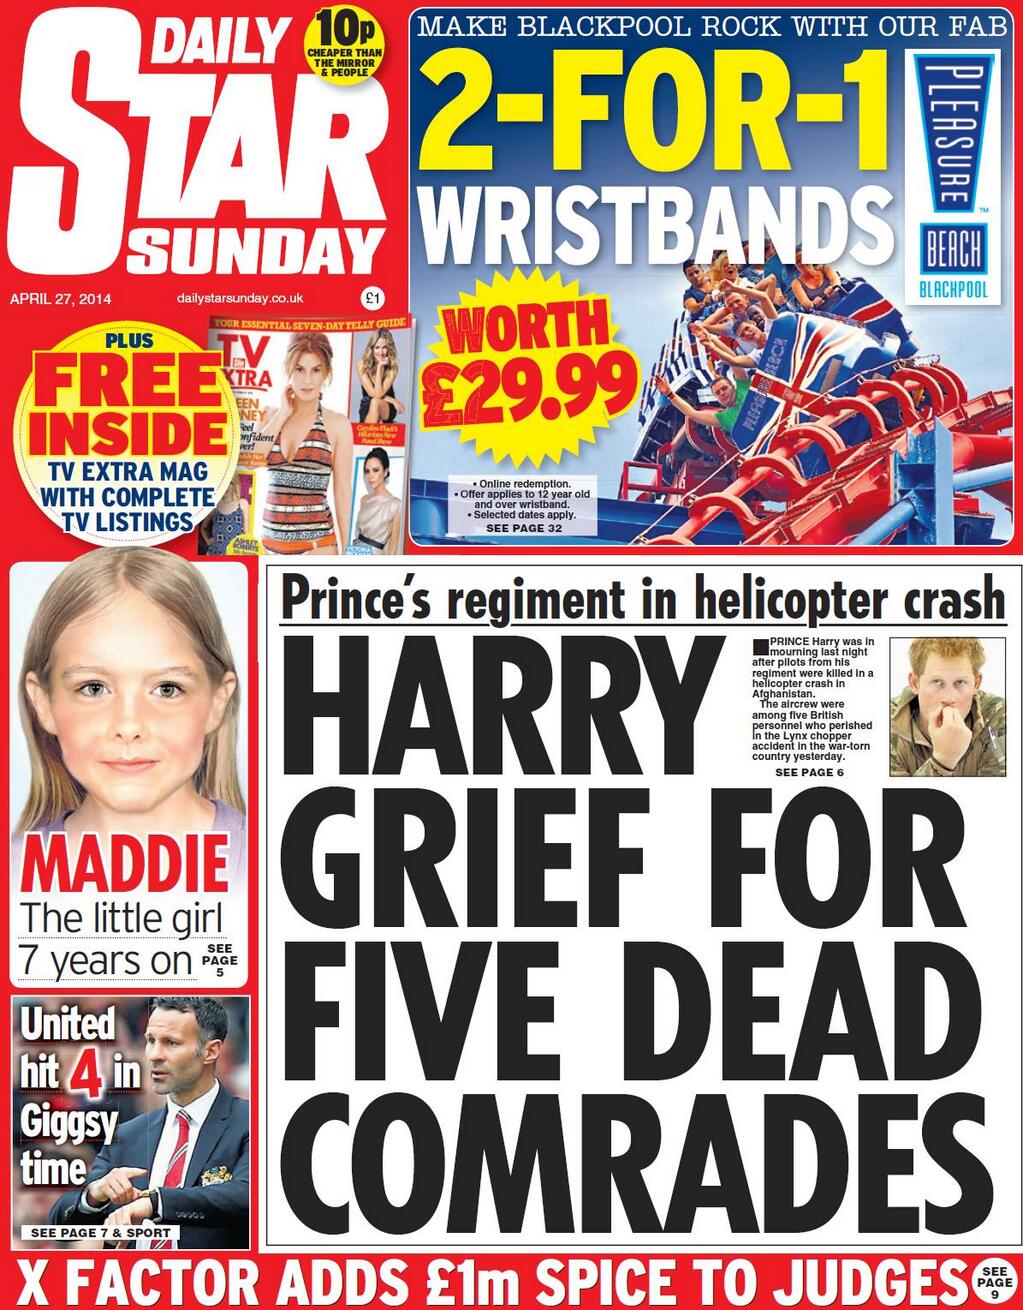 February ABCs: Daily Star Sunday doubles circulation in 